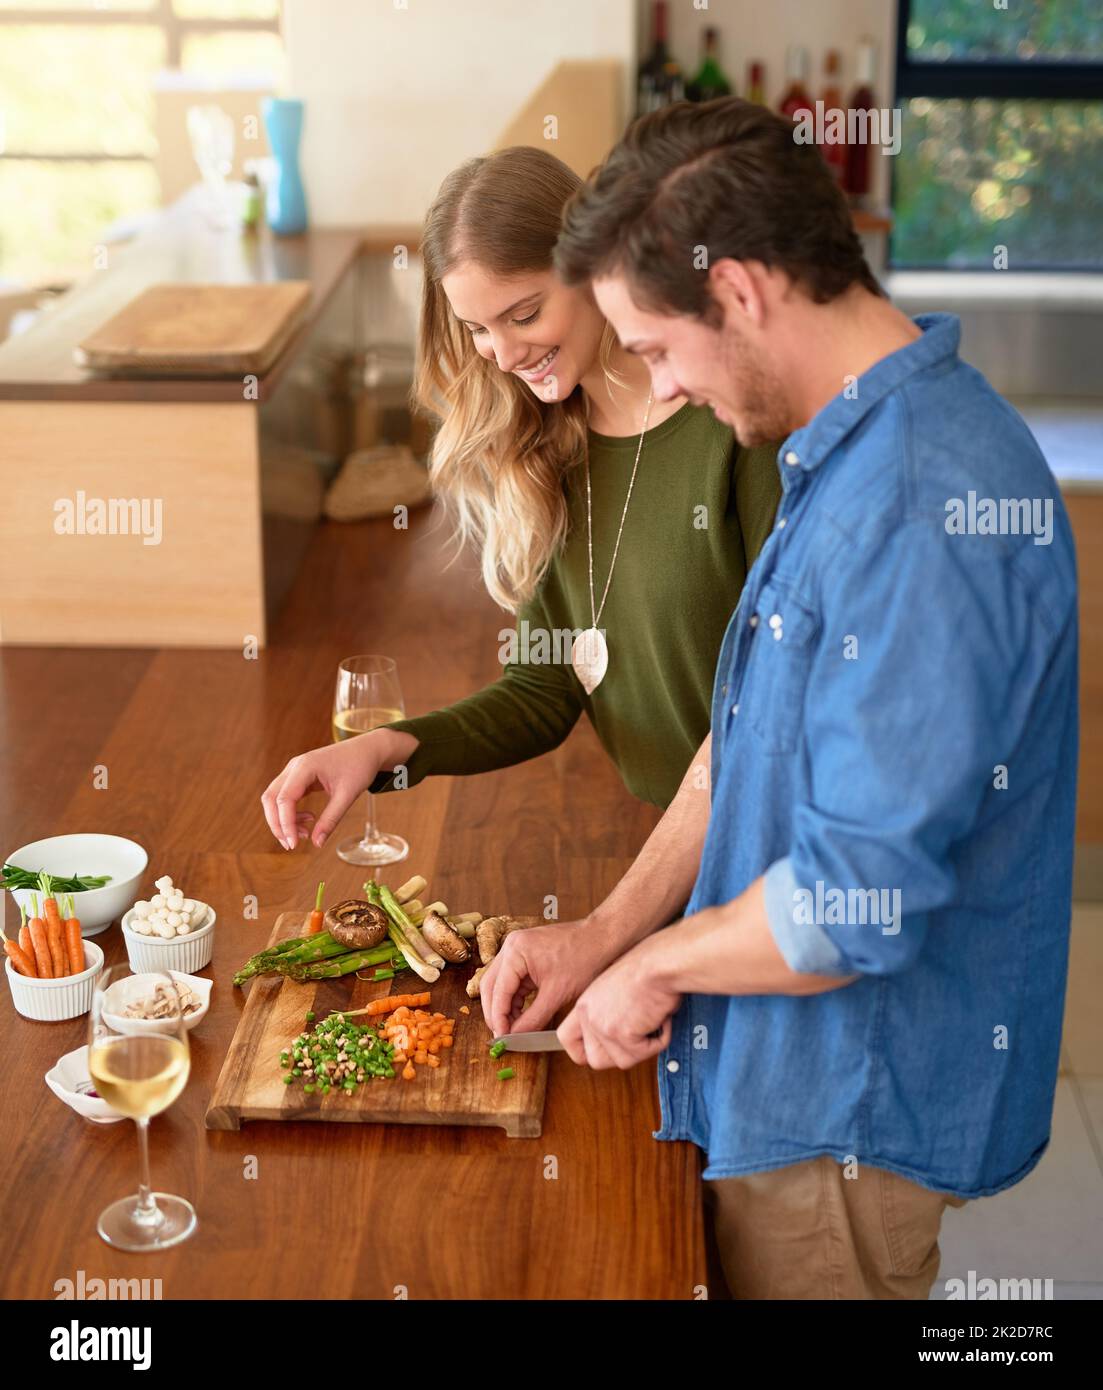 Making the perfect meal together. Shot of a smiling young couple standing at their kitchen counter chopping up ingredients together for dinner. Stock Photo